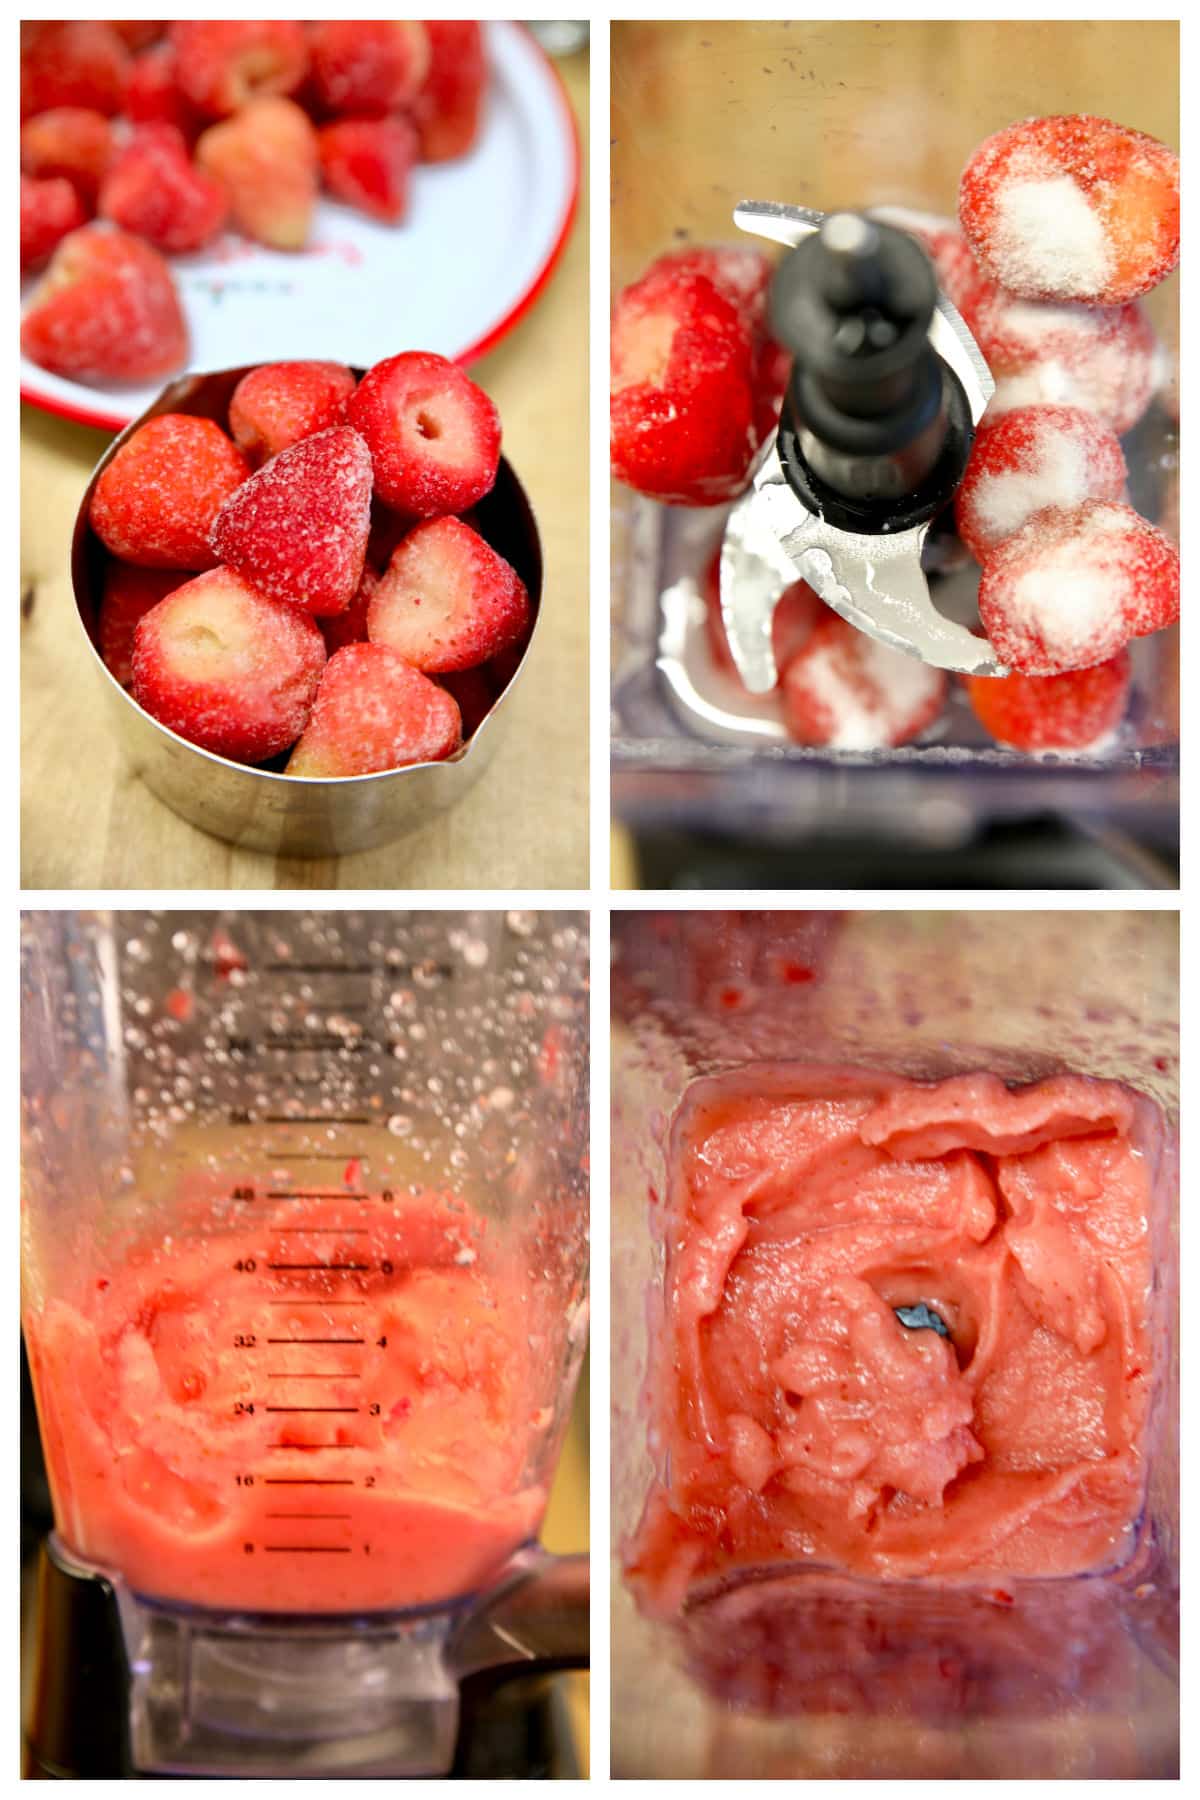 Collage making strawberry purée in a blender.